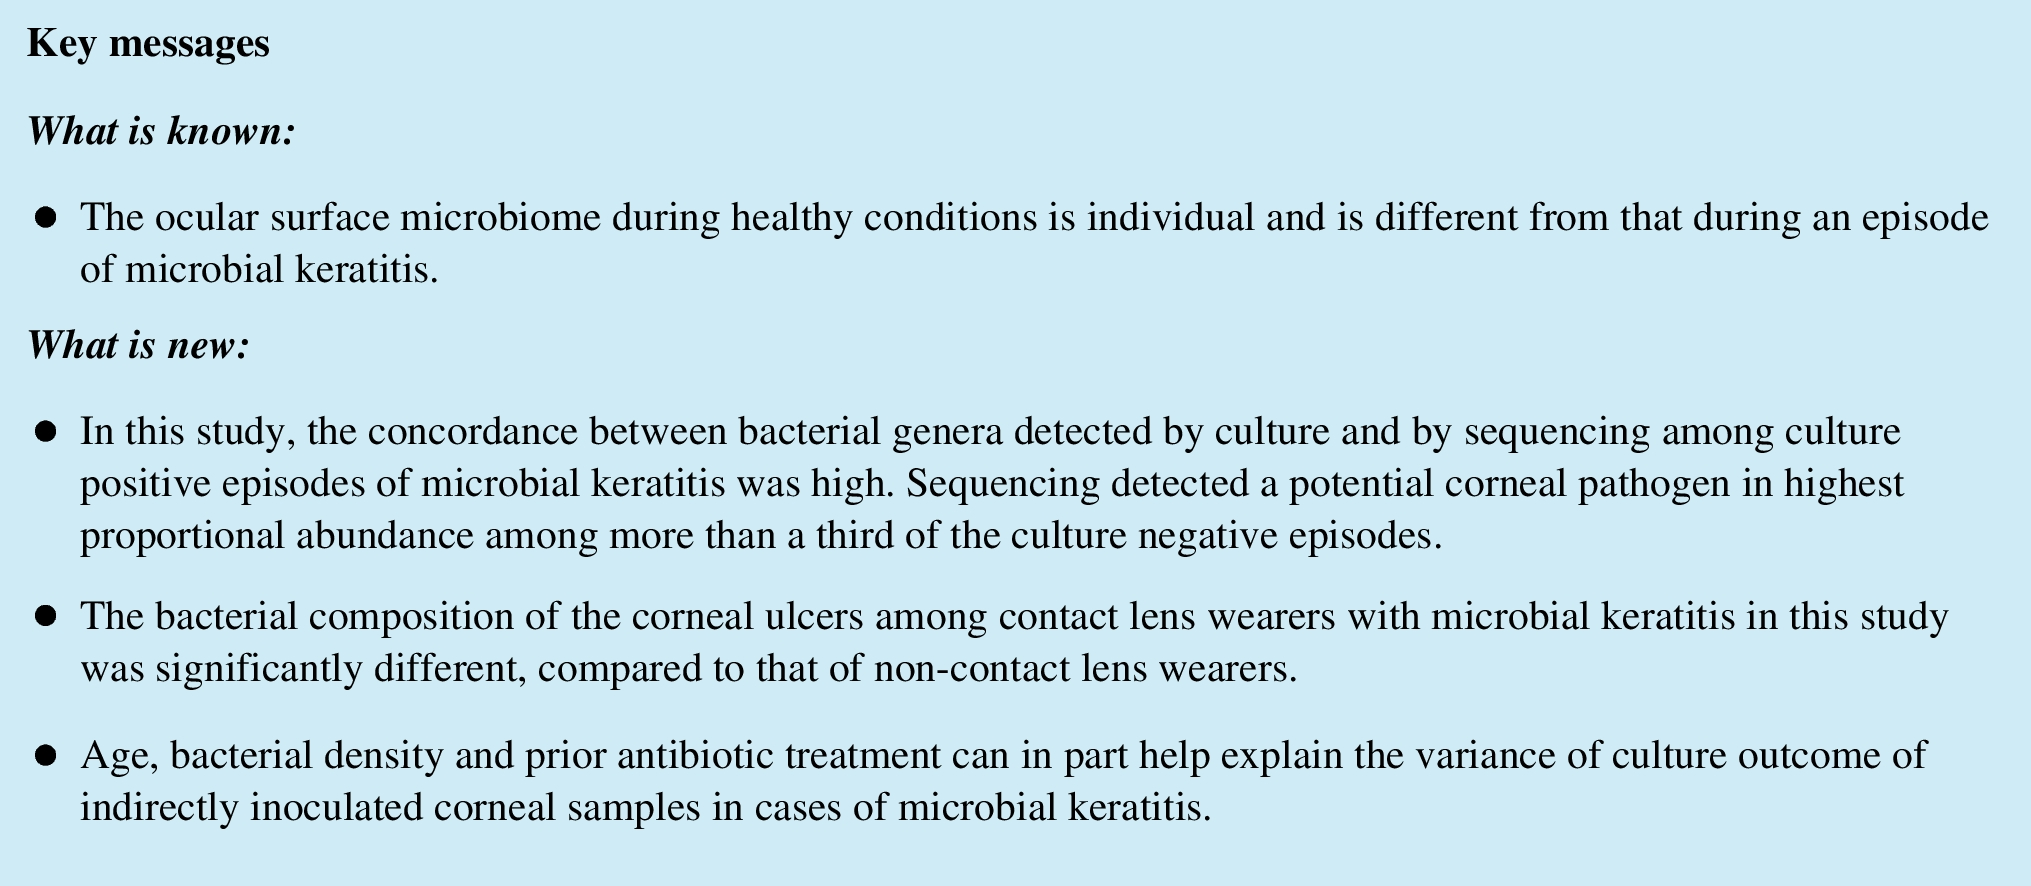 In the eye of the ophthalmologist: the corneal microbiome in microbial keratitis